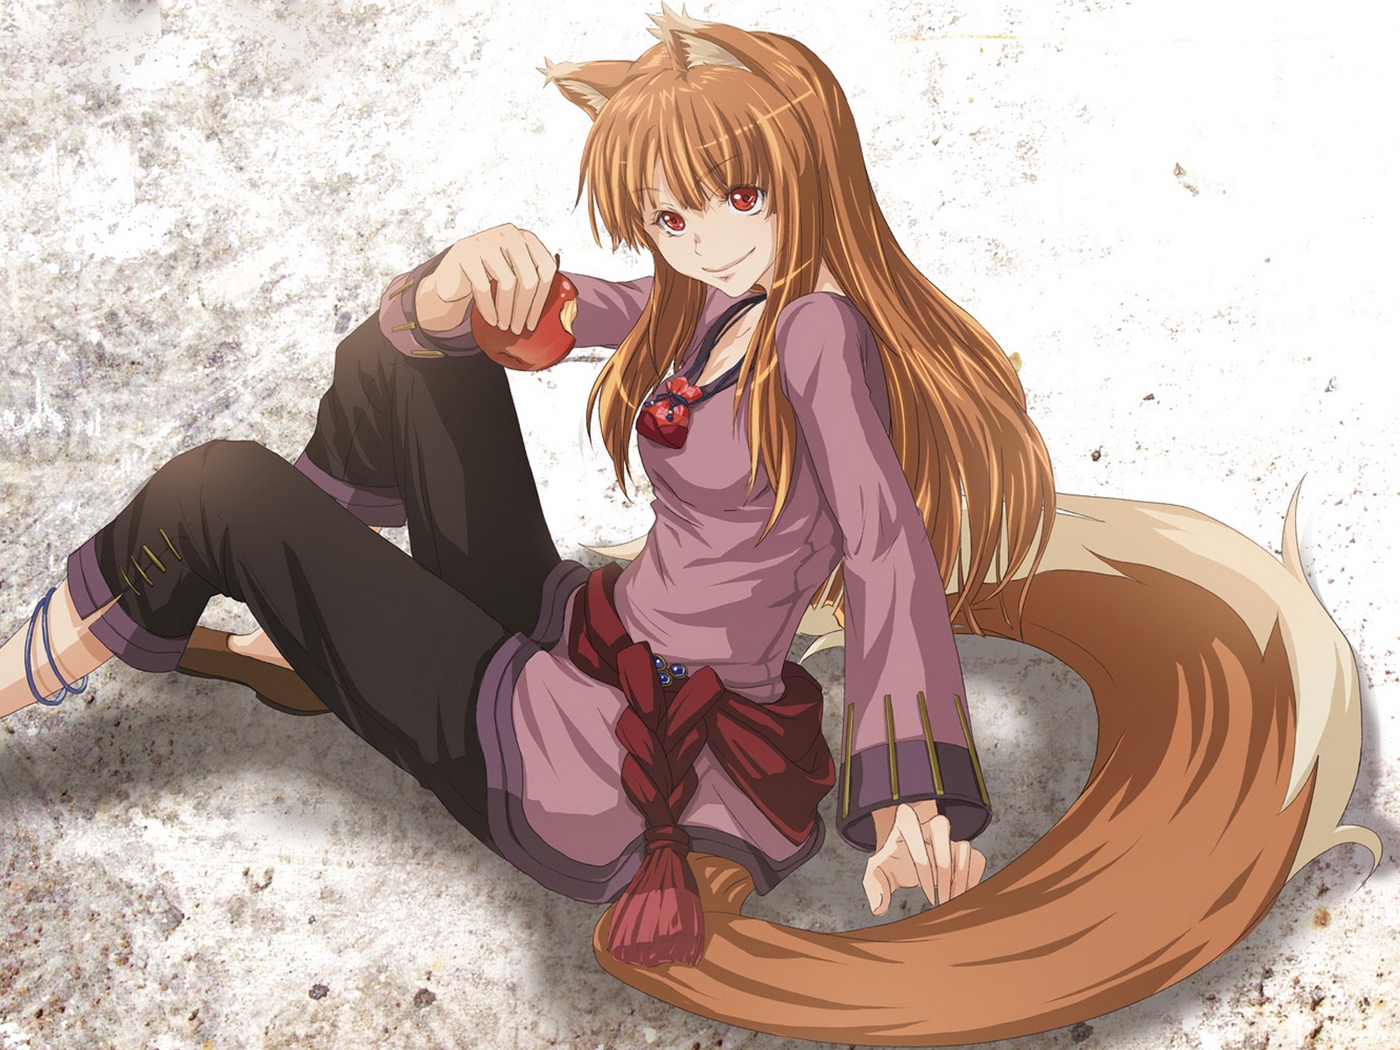 Wallpaper Anime, Girl, Fox, Eating, Apple, Smiling - Spice And Wolf Holo Art - HD Wallpaper 